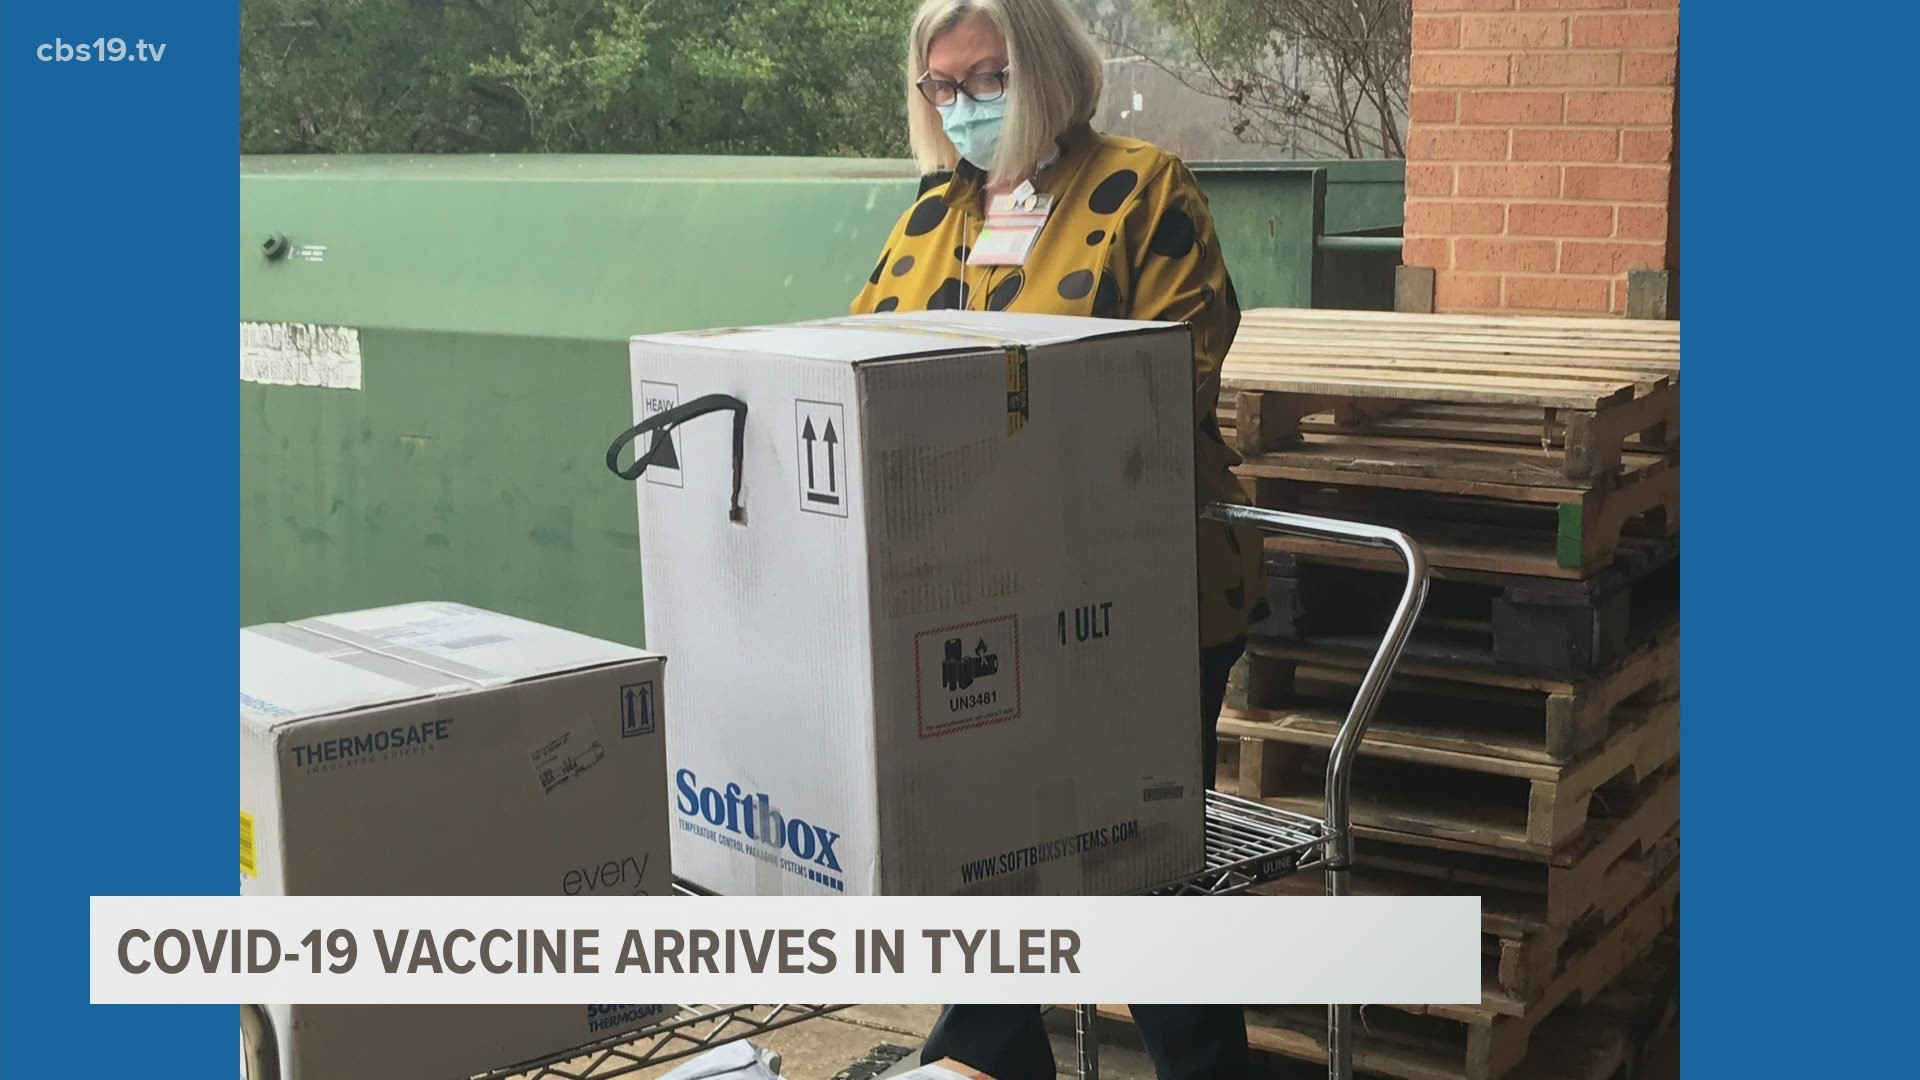 The vaccines were delivered to UTHSCT around 10:15 a.m.